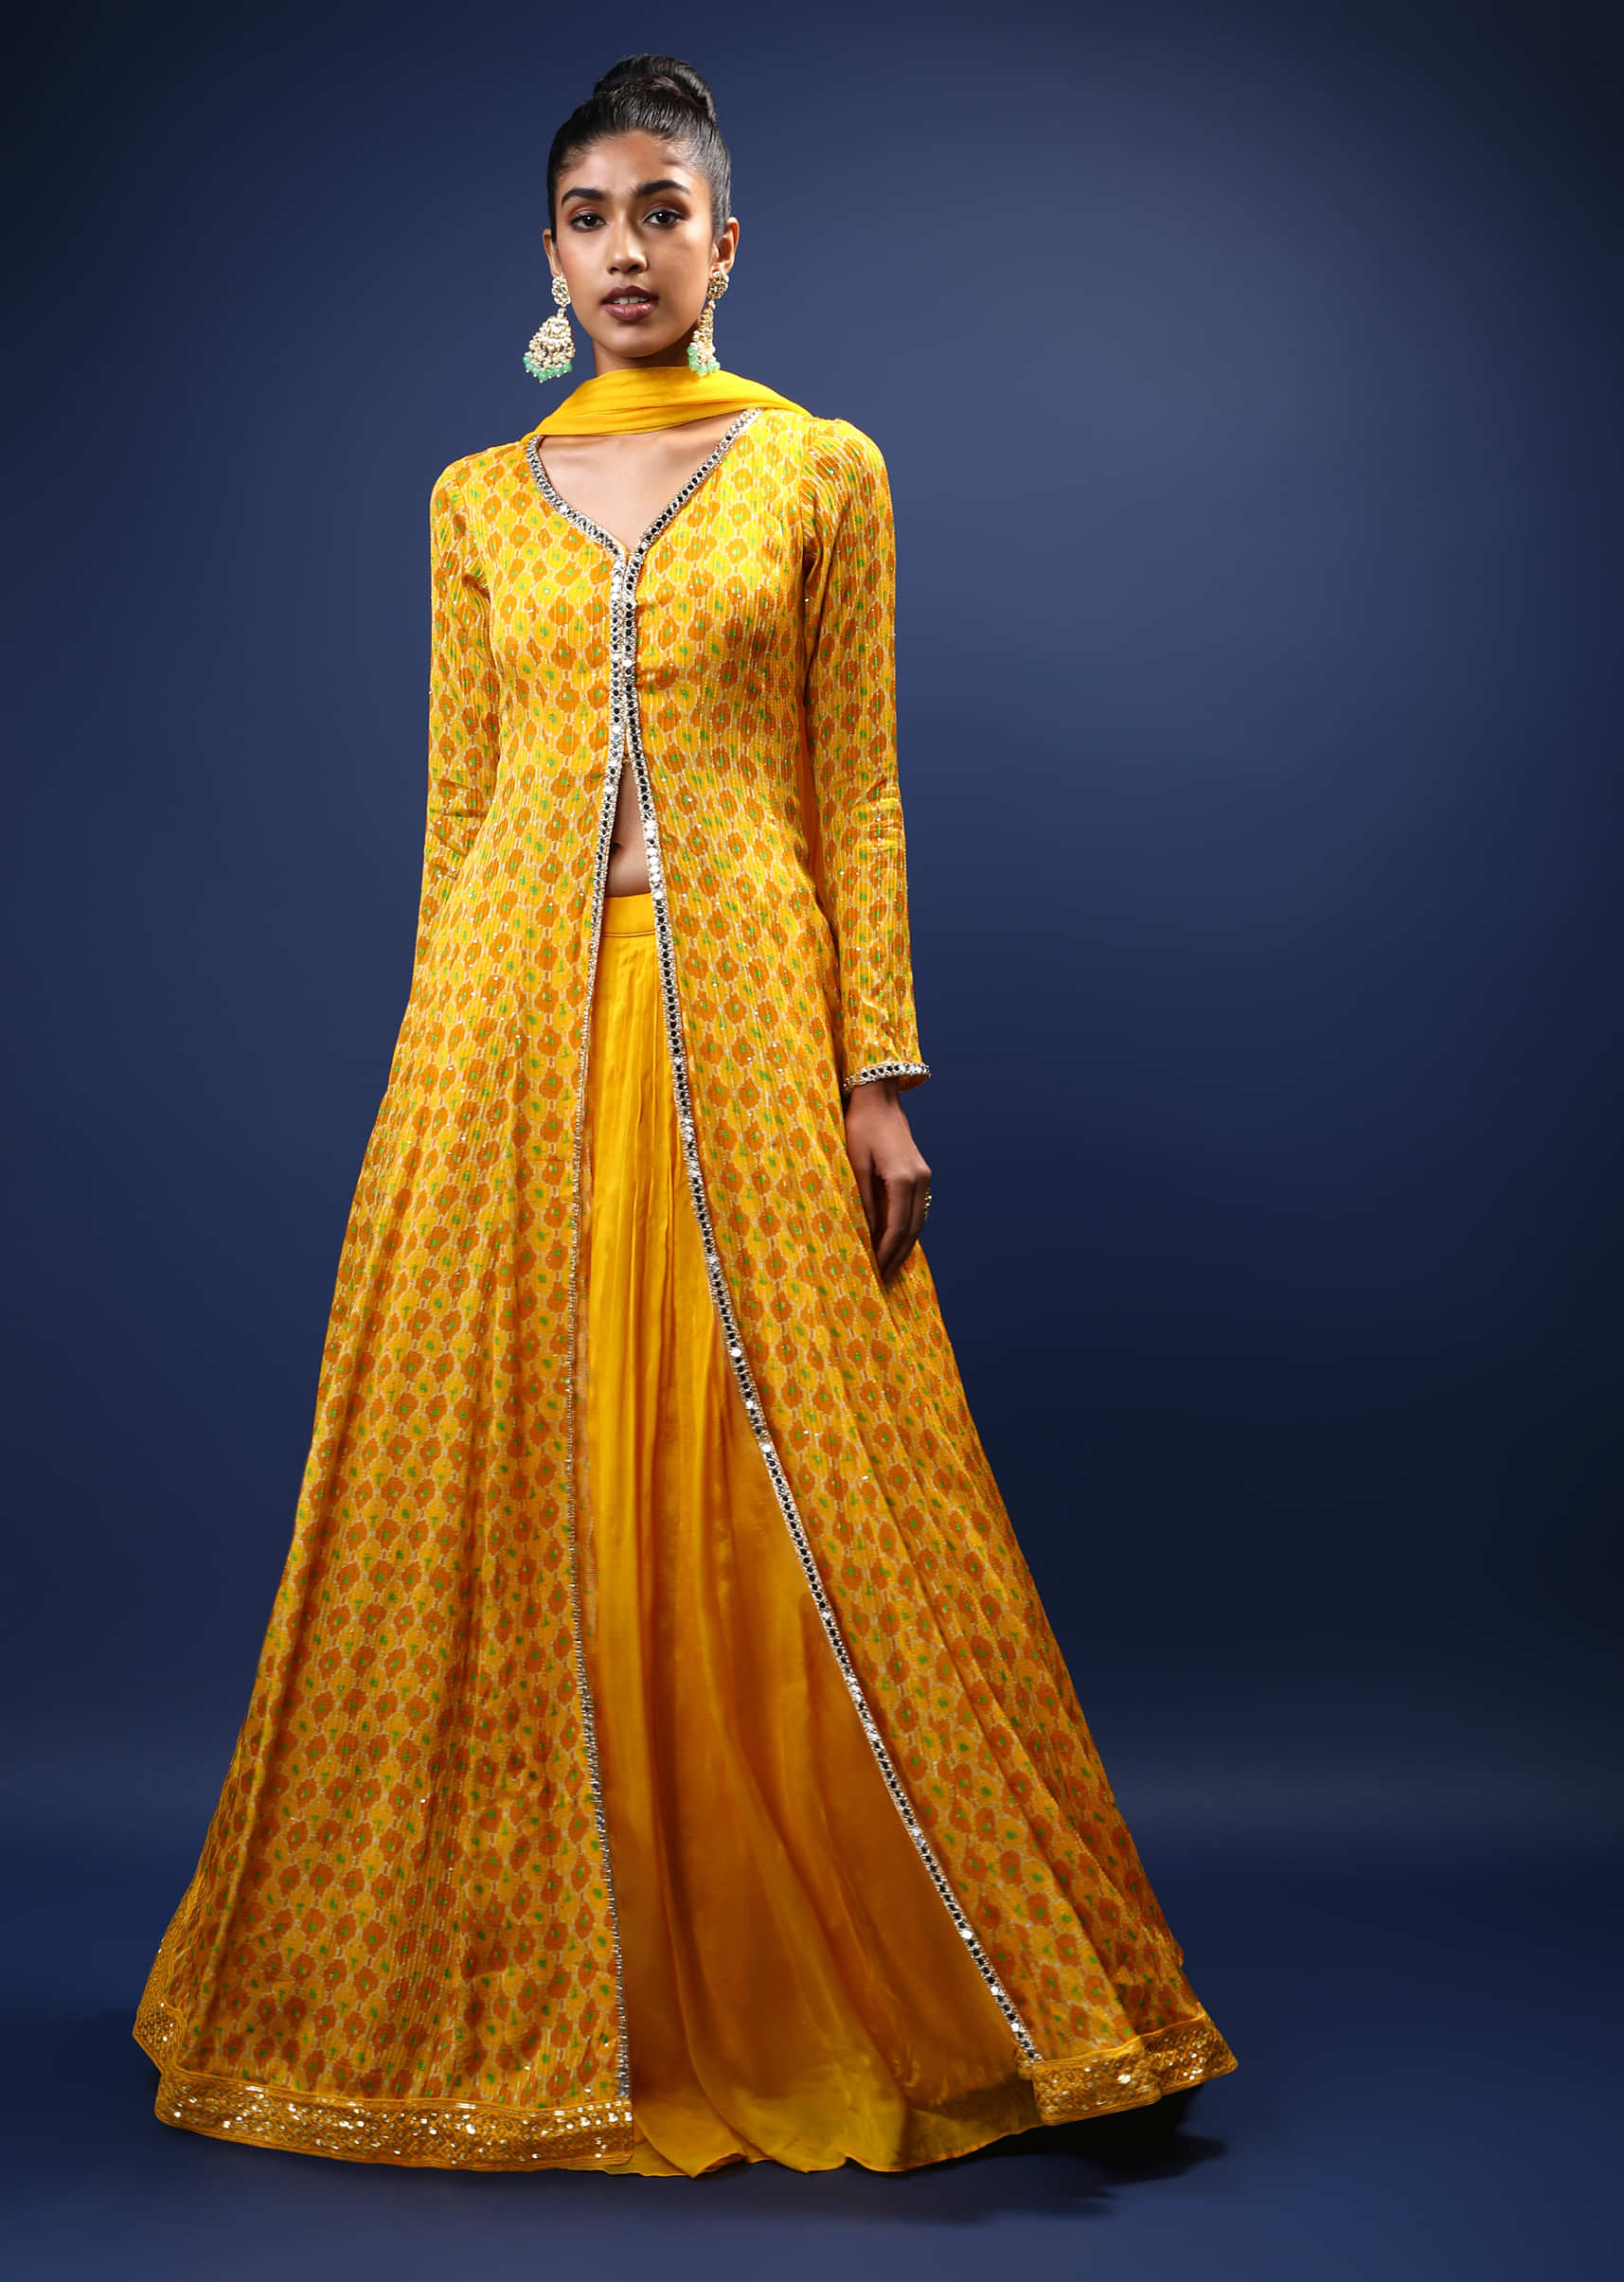 Latest 50 Long Kurta With Skirt Designs and Patterns 2022 - Tips and Beauty-vinhomehanoi.com.vn